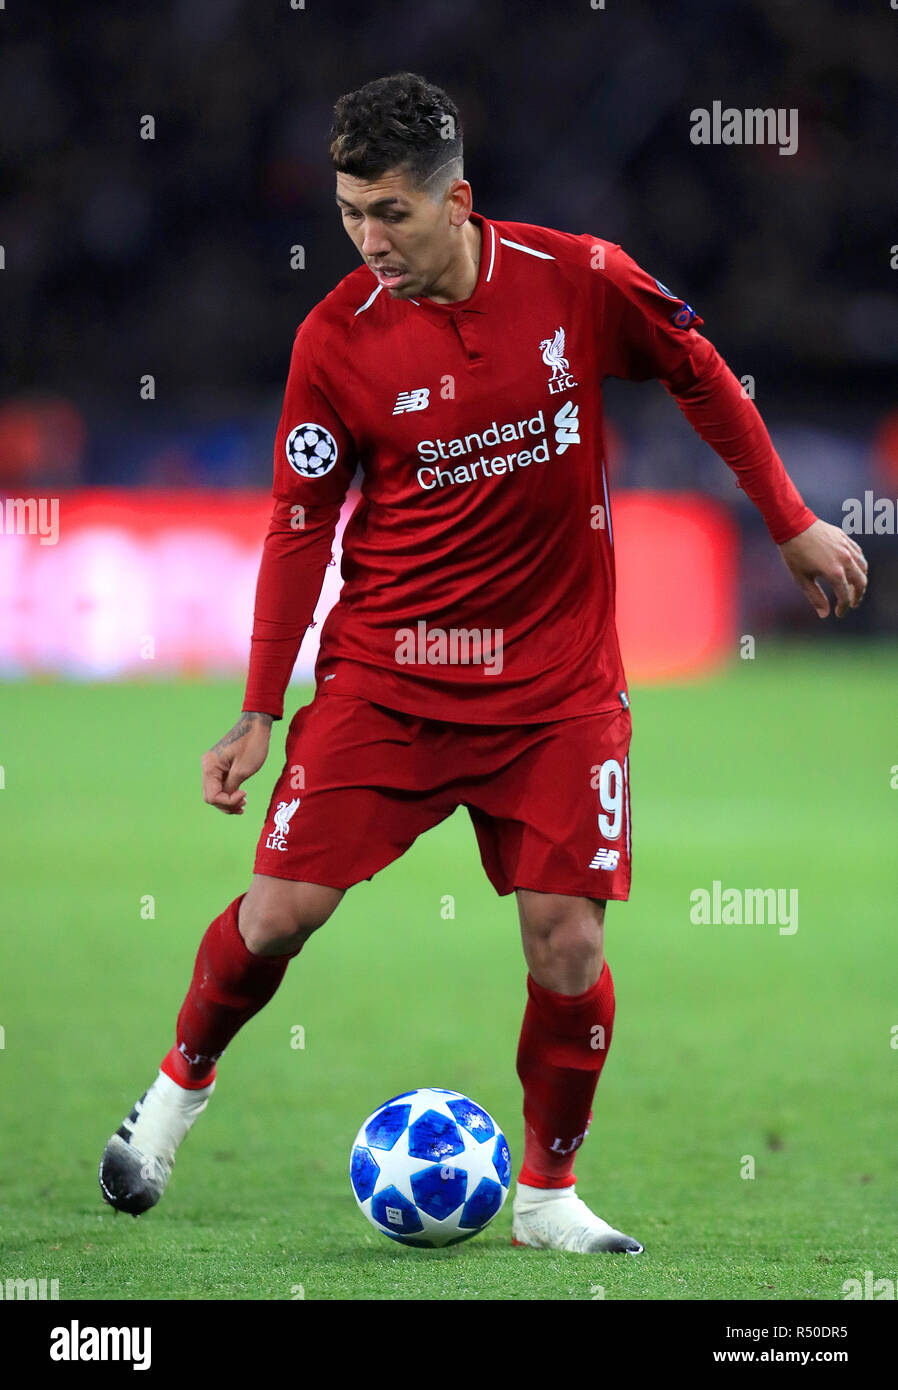 Liverpool's Roberto Firmino during the UEFA Champions League, Group C match at the Parc des Princes, Paris. PRESS ASSOCIATION Photo. Picture date: Wednesday November 28, 2018. See PA story soccer PSG. Photo credit should read: Mike Egerton/PA Wire. Stock Photo